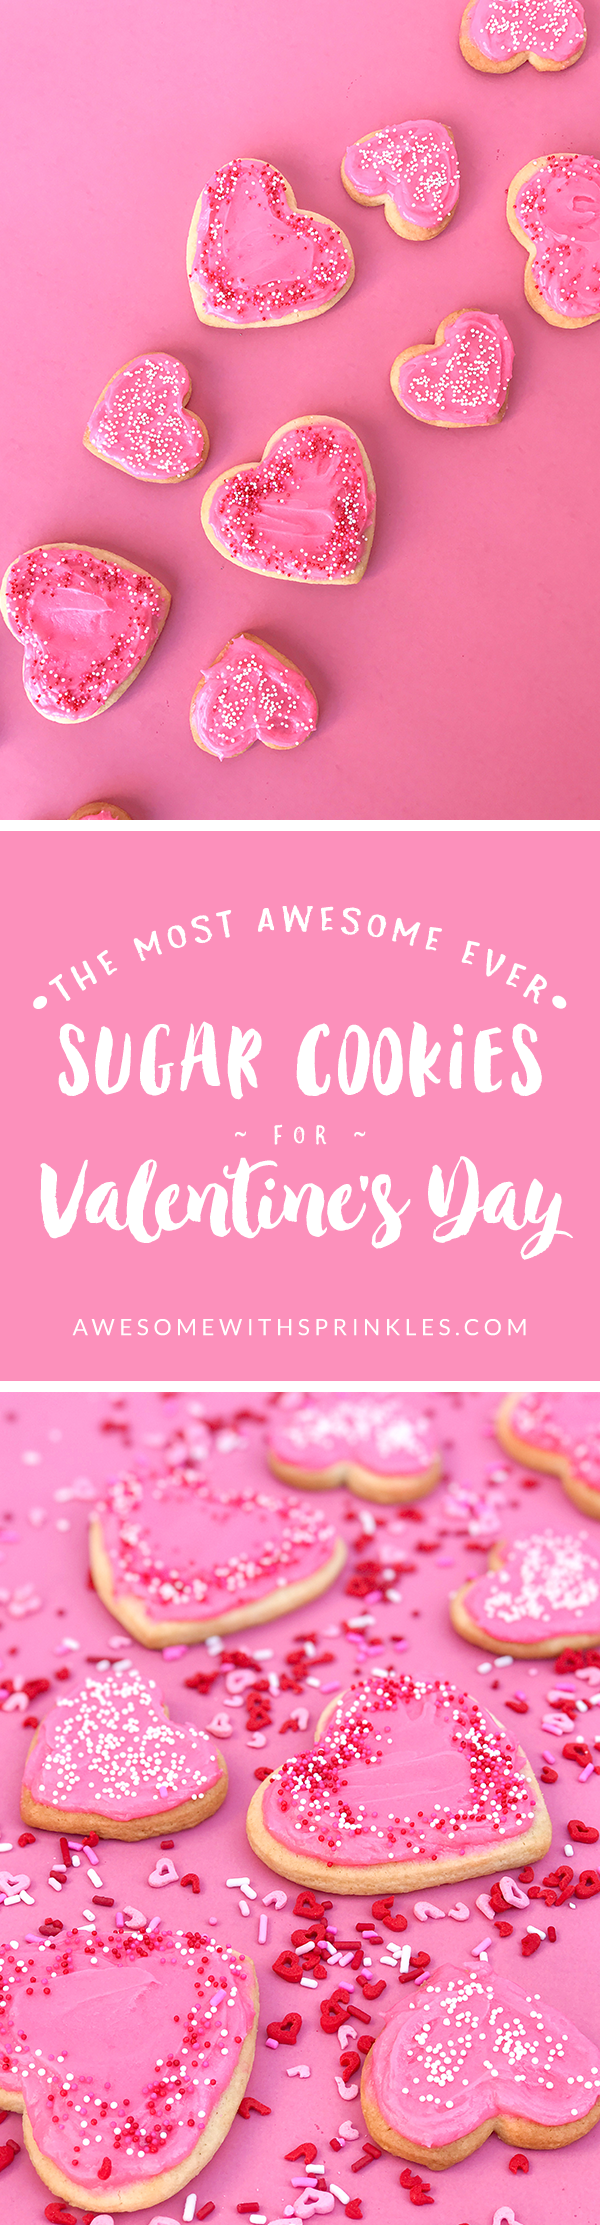 The Most Awesome Ever Sugar Cookies for Valentine's Day